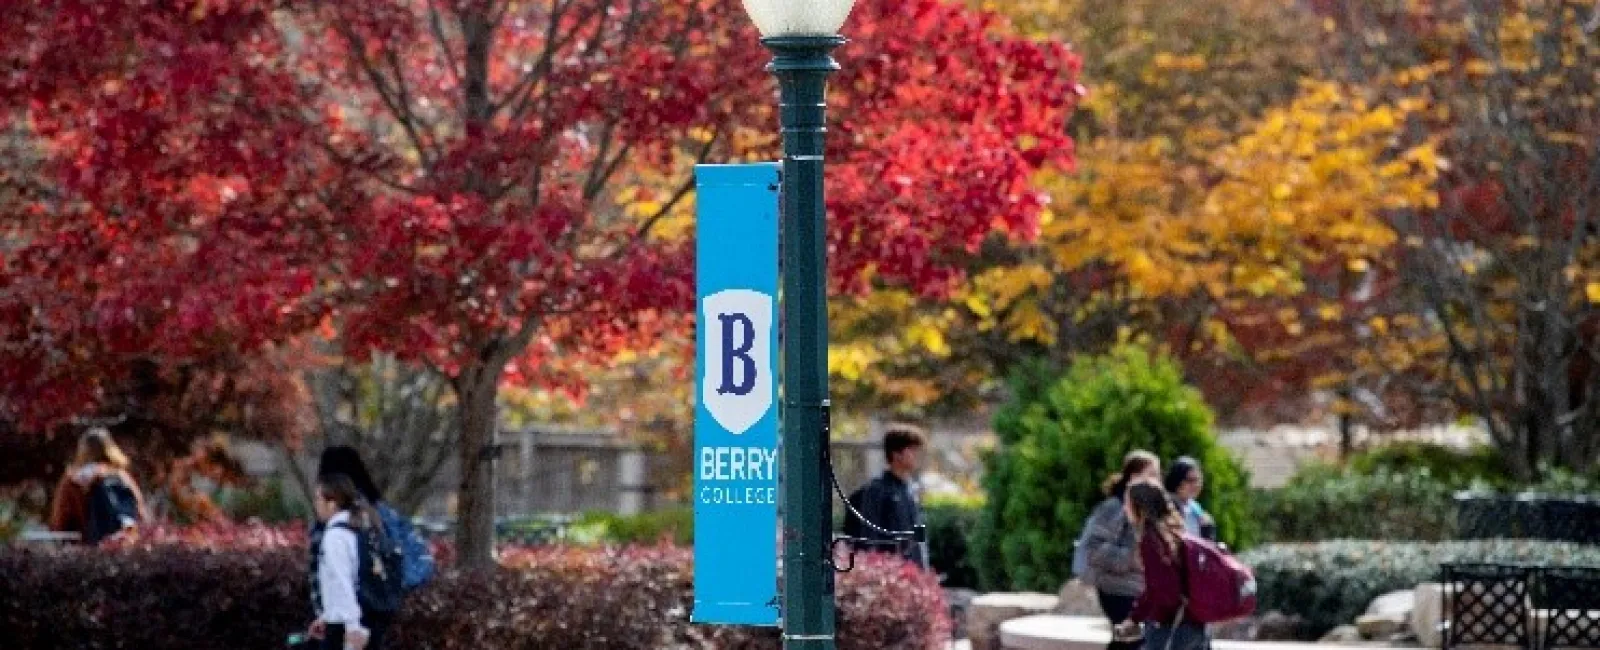 Berry College Logo on a Lamp Post in Front of Fall-Colored Trees